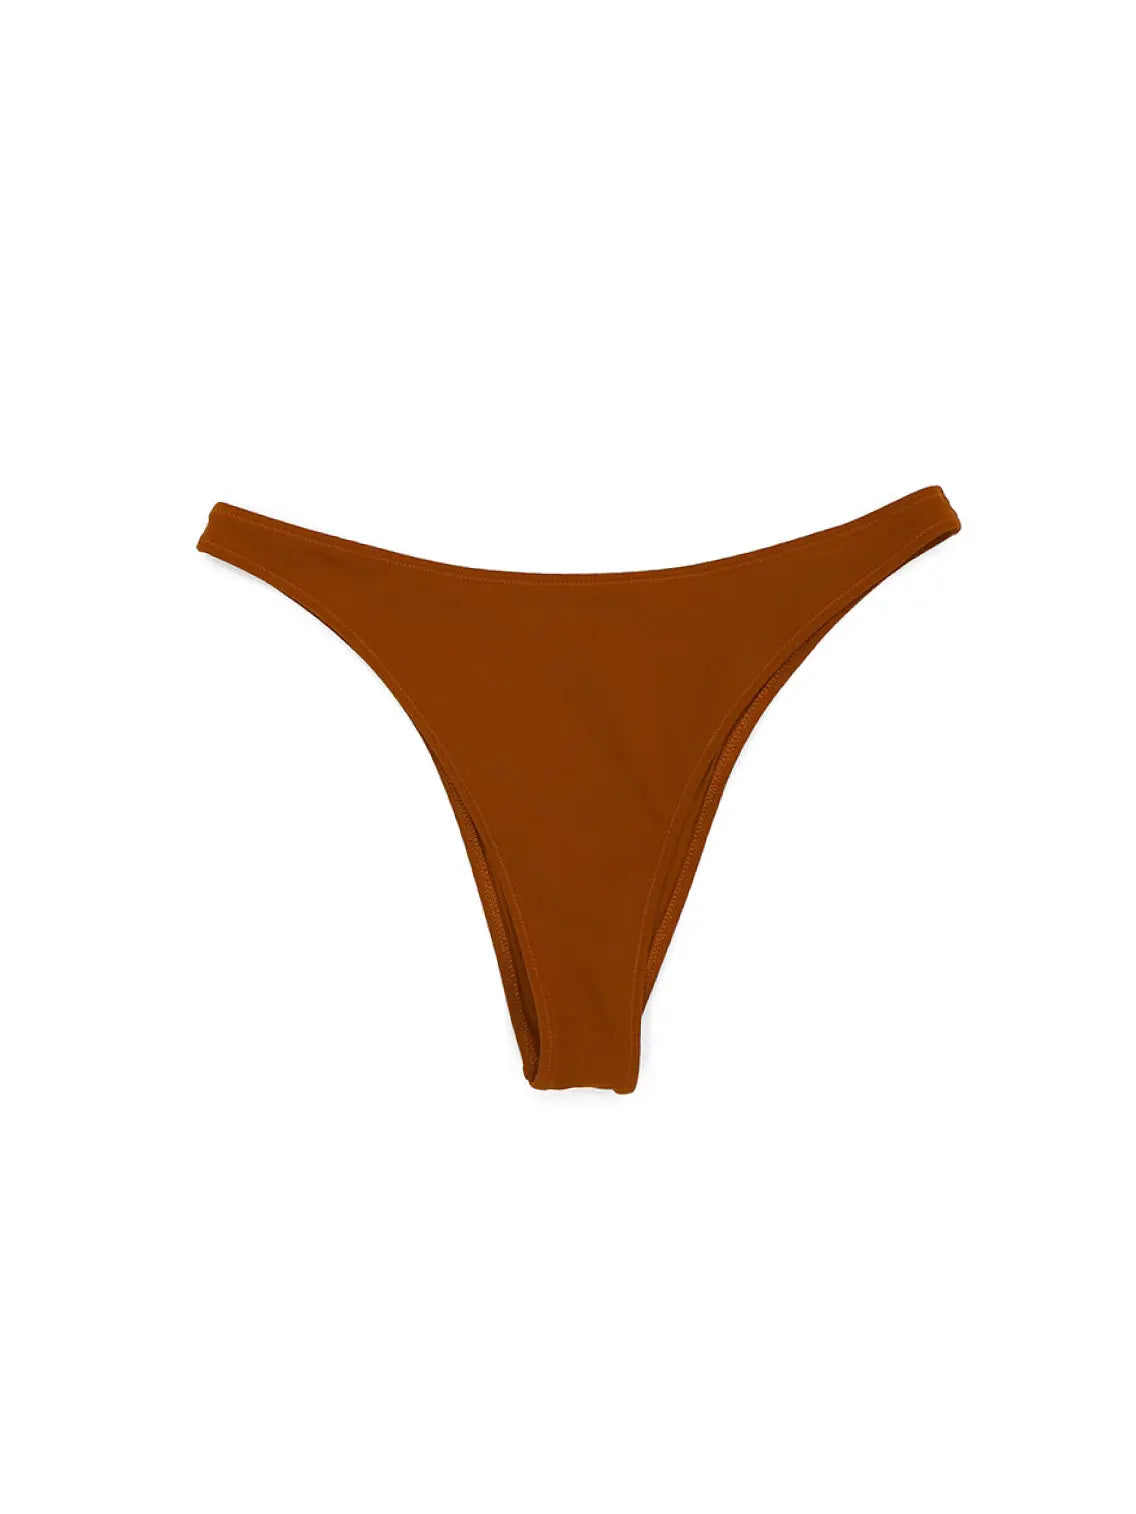 A pair of solid brown bikini bottoms are displayed against a plain white background. The Trentotto Terracota Bikini Bottom by Lido, available at Bassal Store in Barcelona, features a simple design with high-cut legs and a minimalistic style.